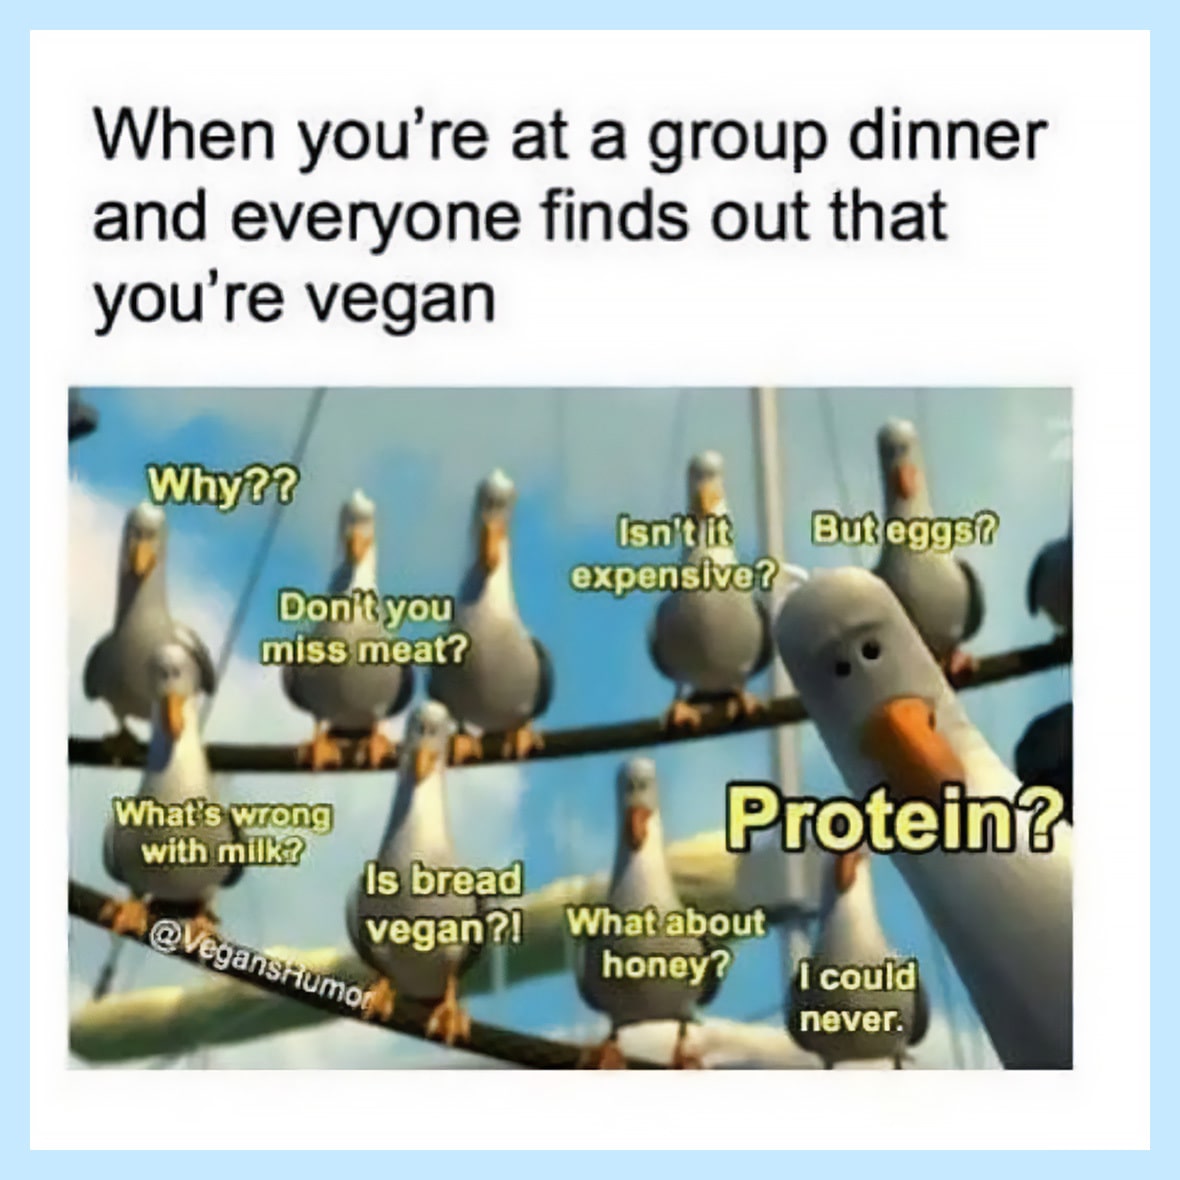 An image of the seagulls from Finding Nemo with various questions including "Why??" and "Where do you get your protein???" Text above reads: When you're at a group dinner and everyone finds out you're vegan.